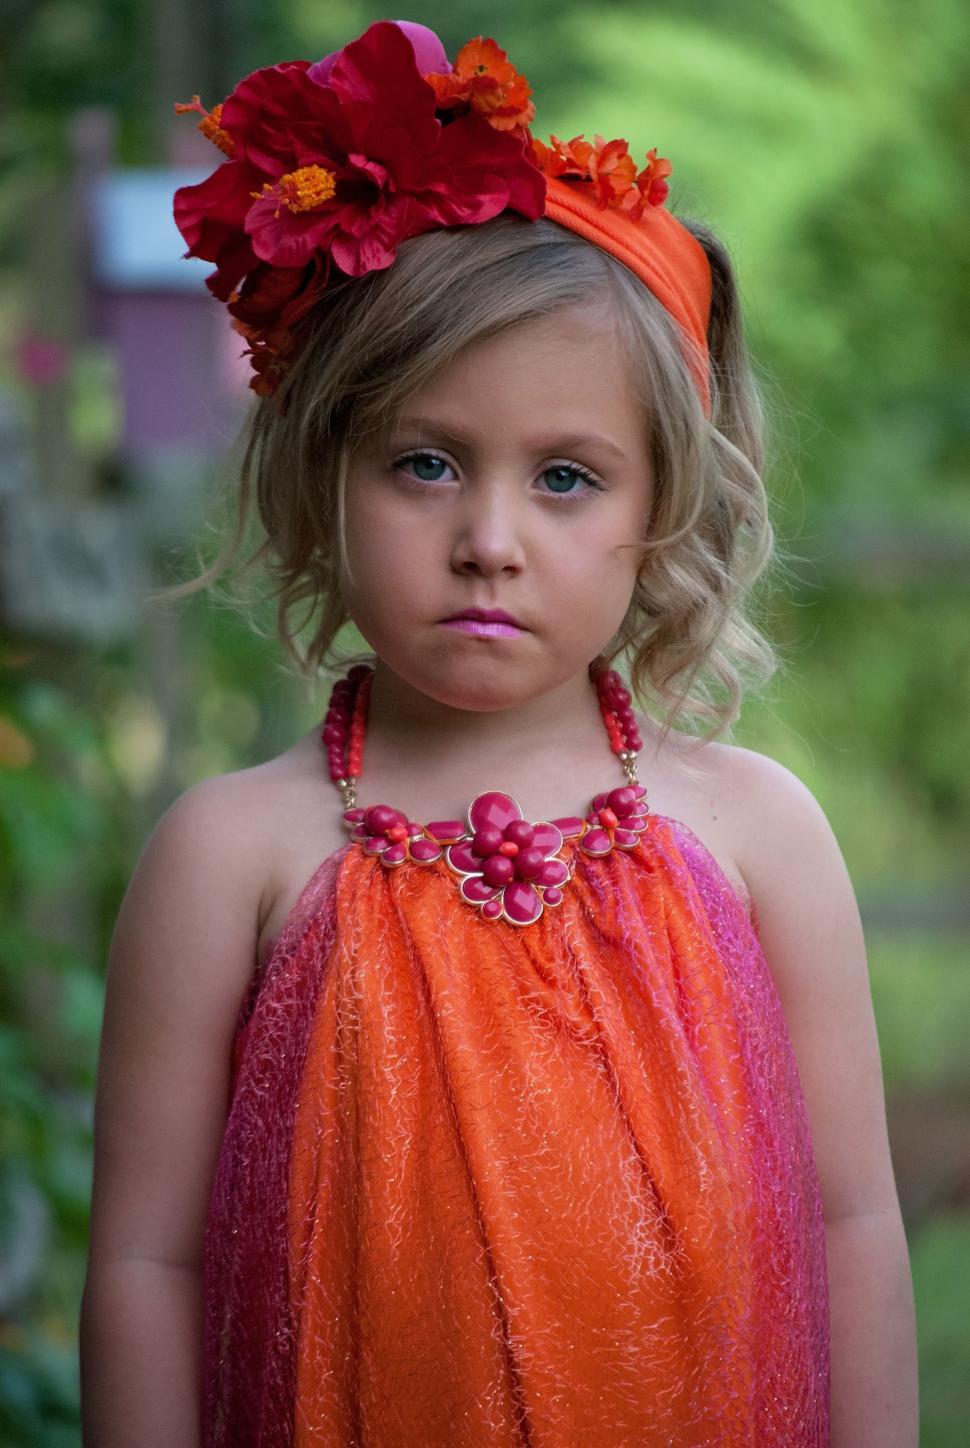 Free Image of Cute Little Girl - Looking Sad  